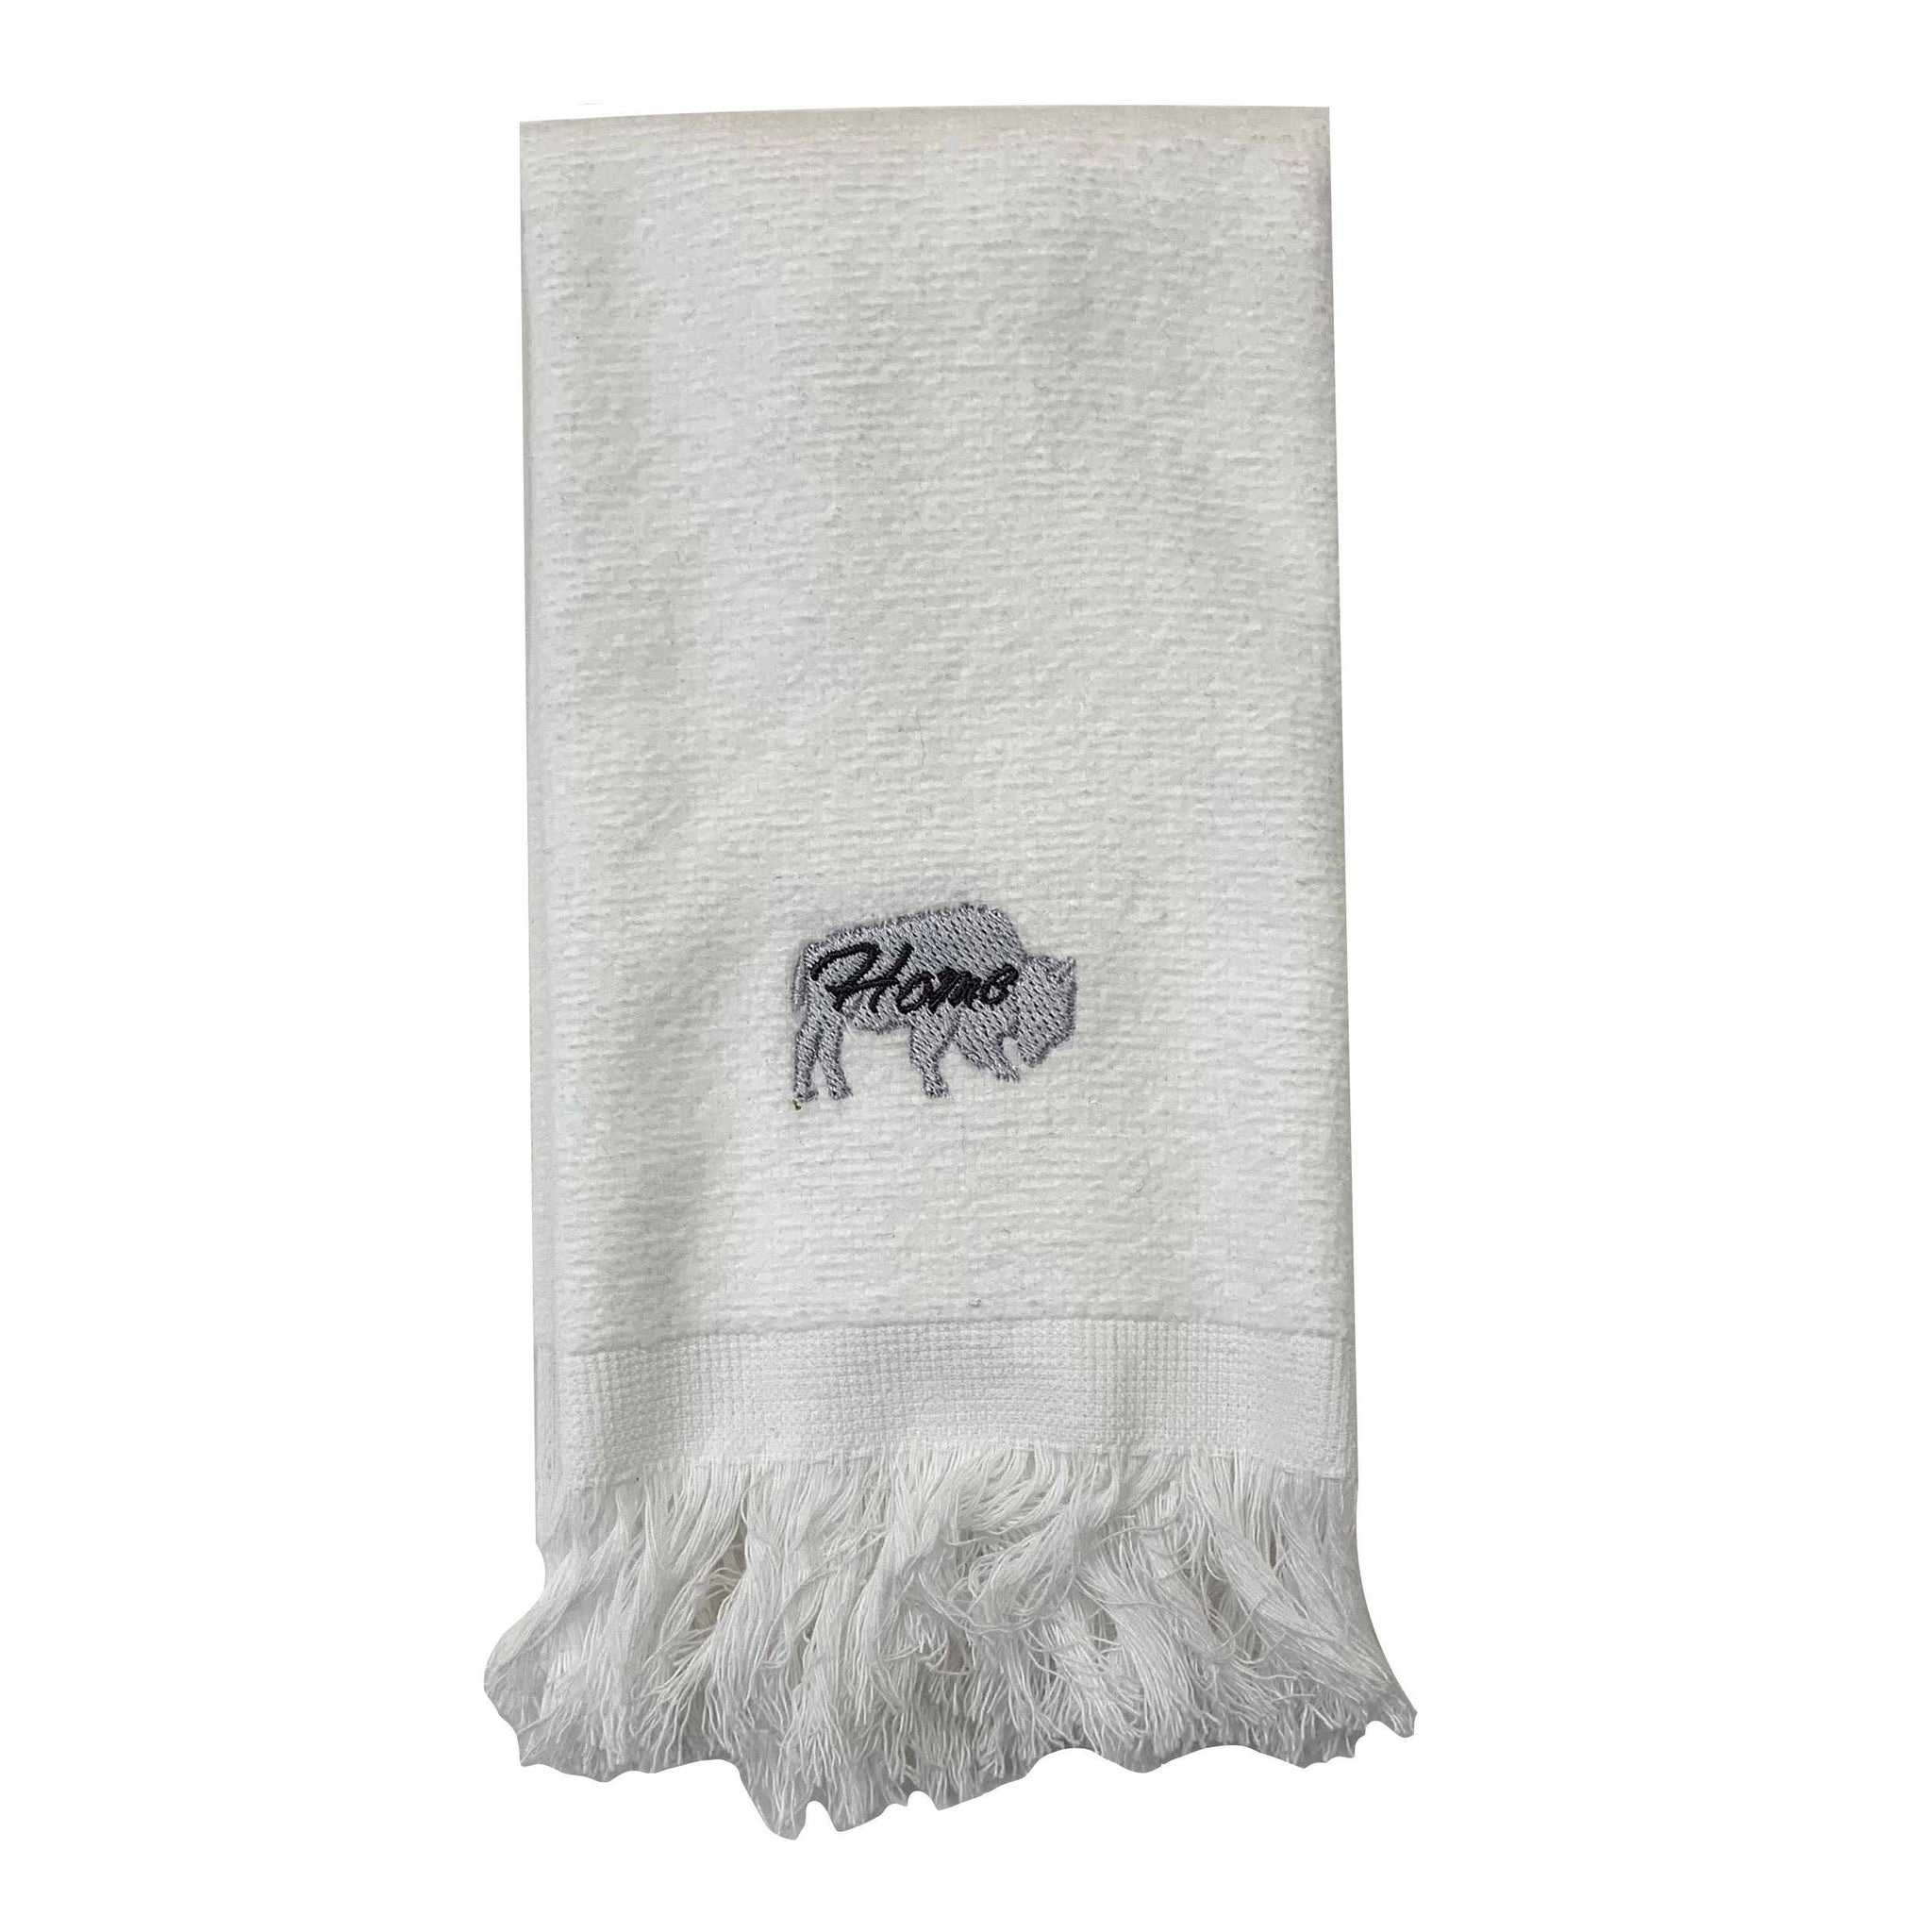 BFLO Home Embroidered Fingertip Towel